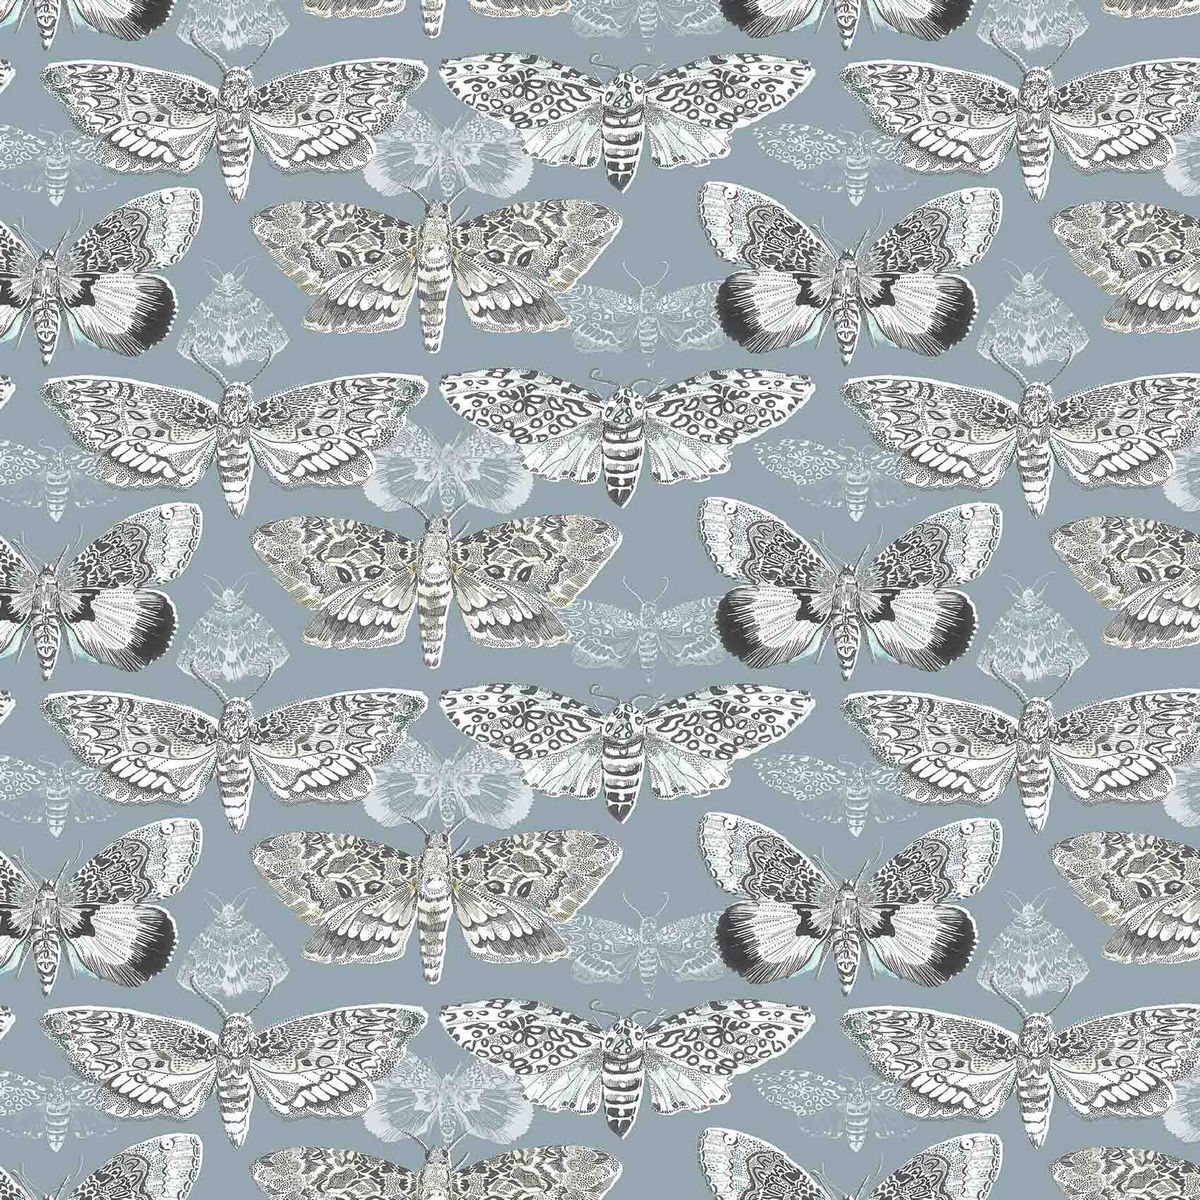 Nocturnal Sea Thistle Fabric by Voyage Maison